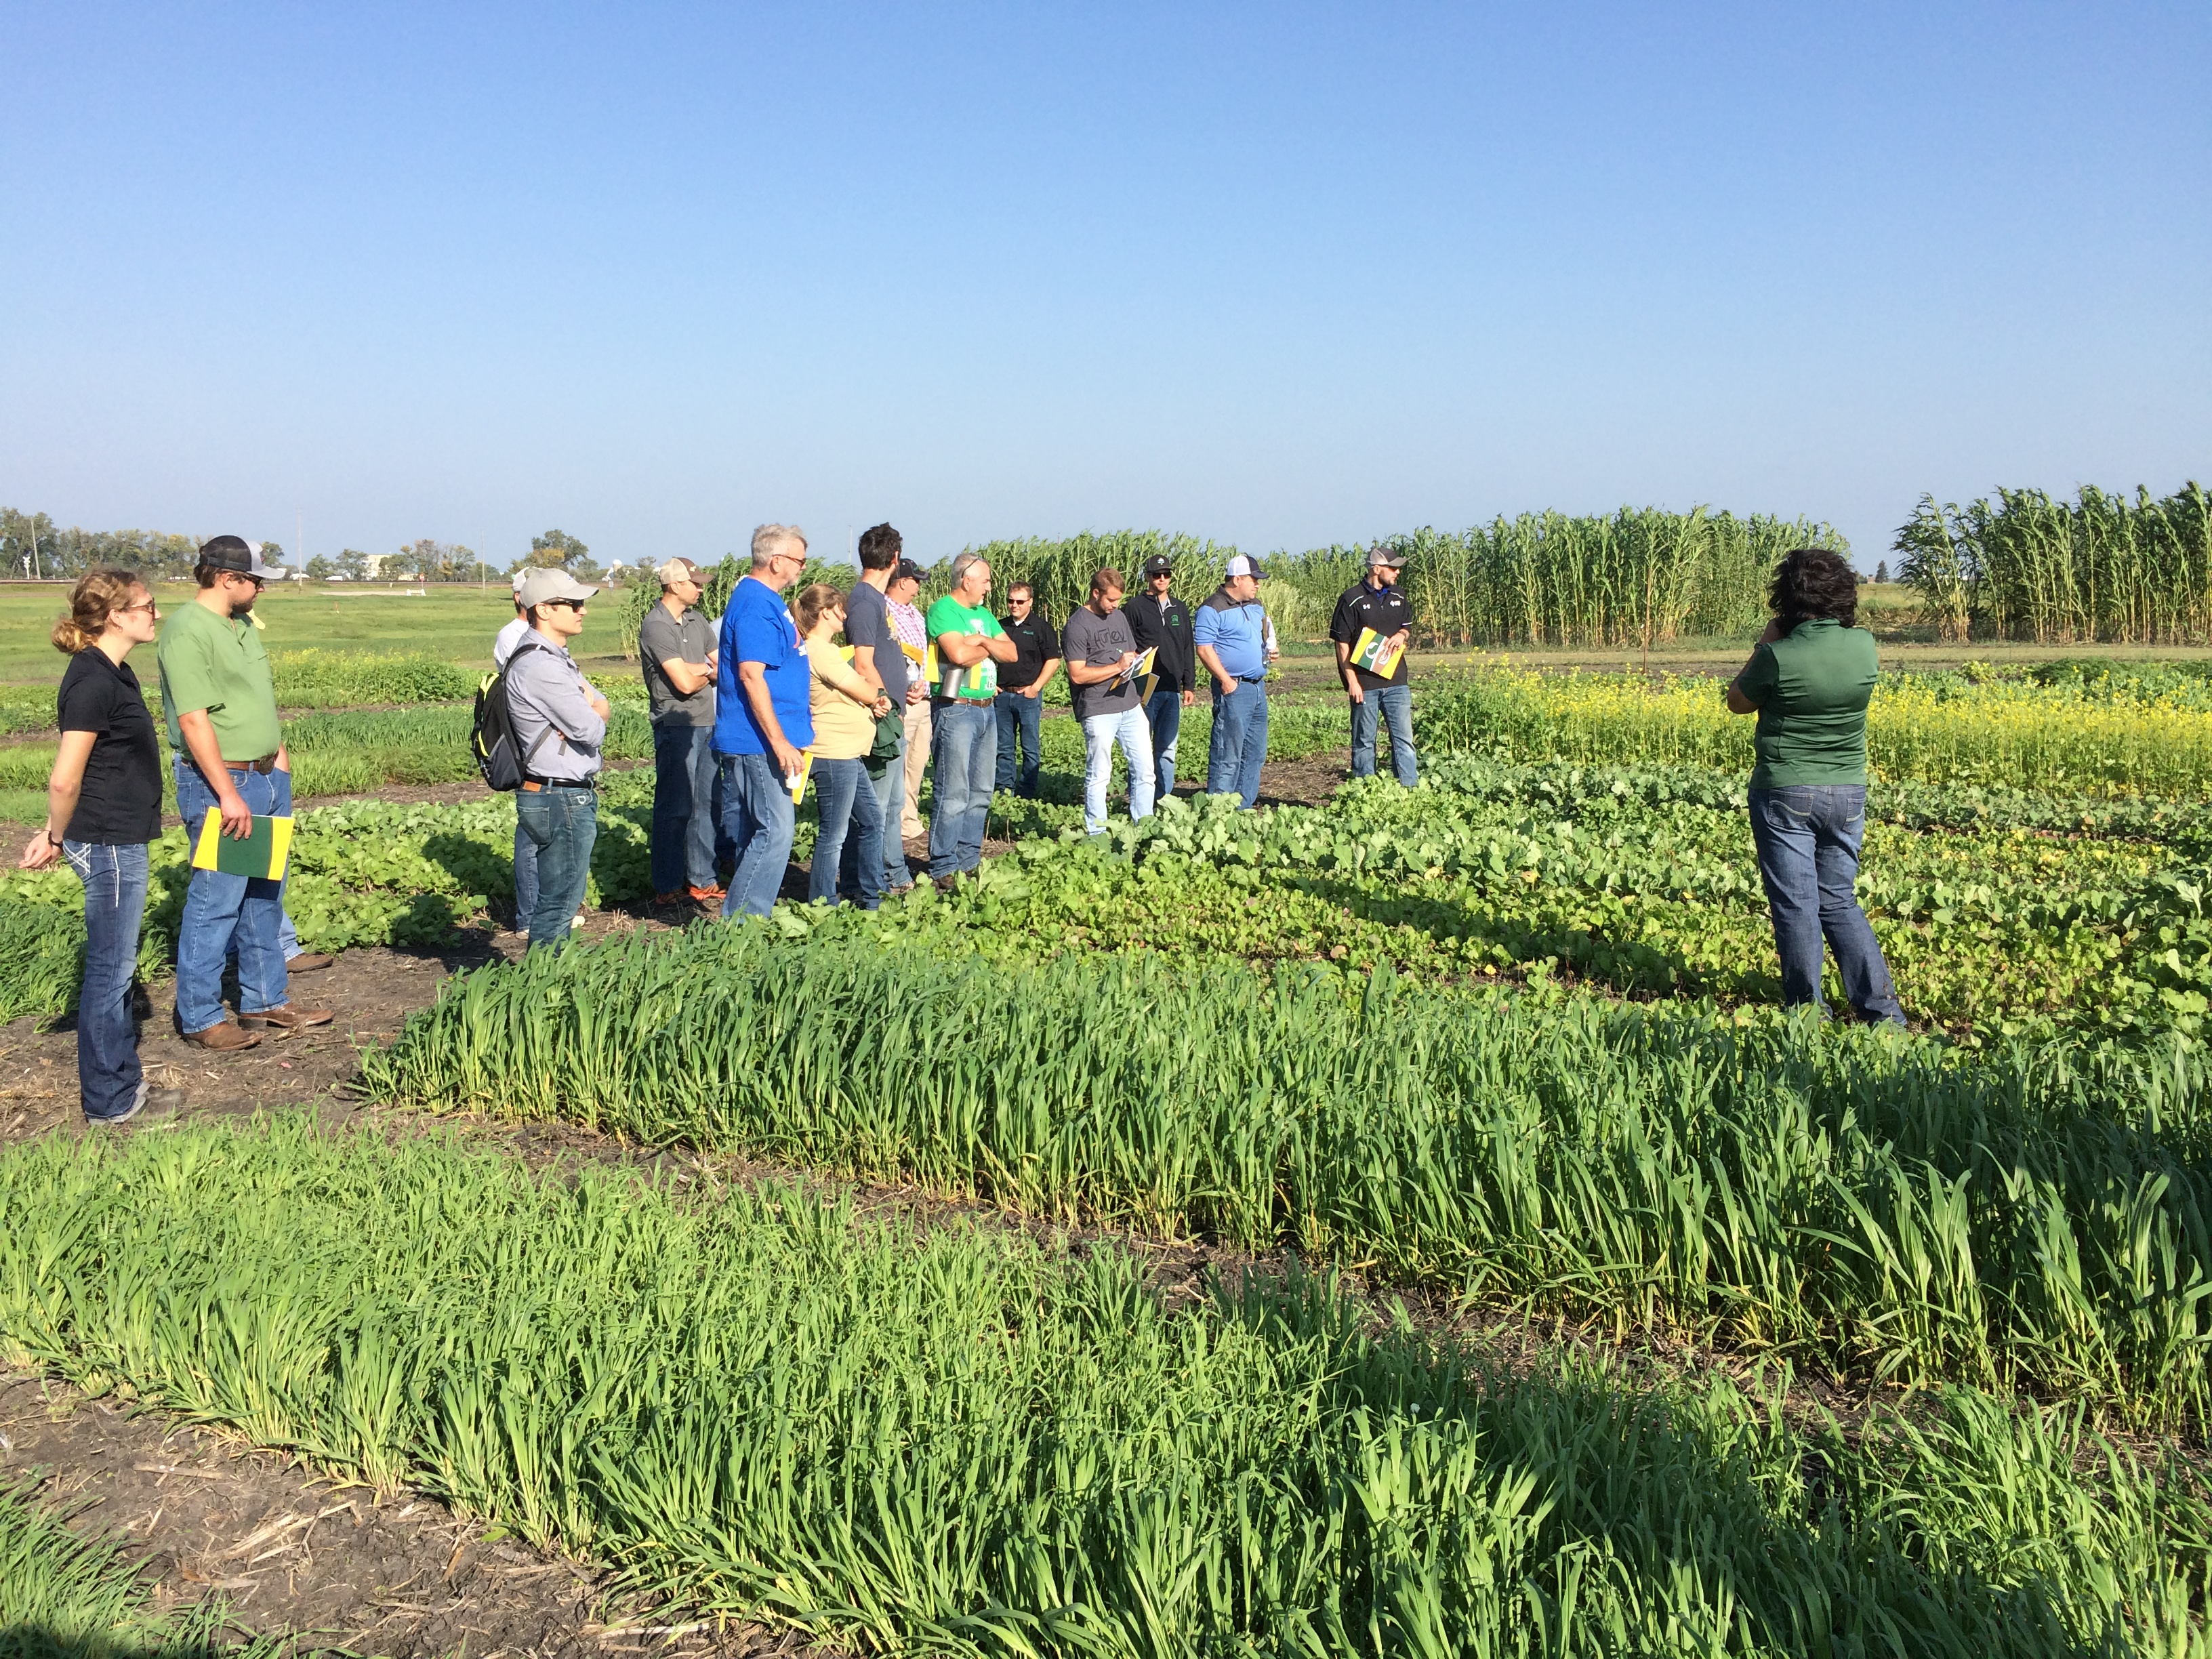 Participants will explore the benefits of cover crops and intercropping at the NDSU field day scheduled for Sept. 20. (NDSU photo)